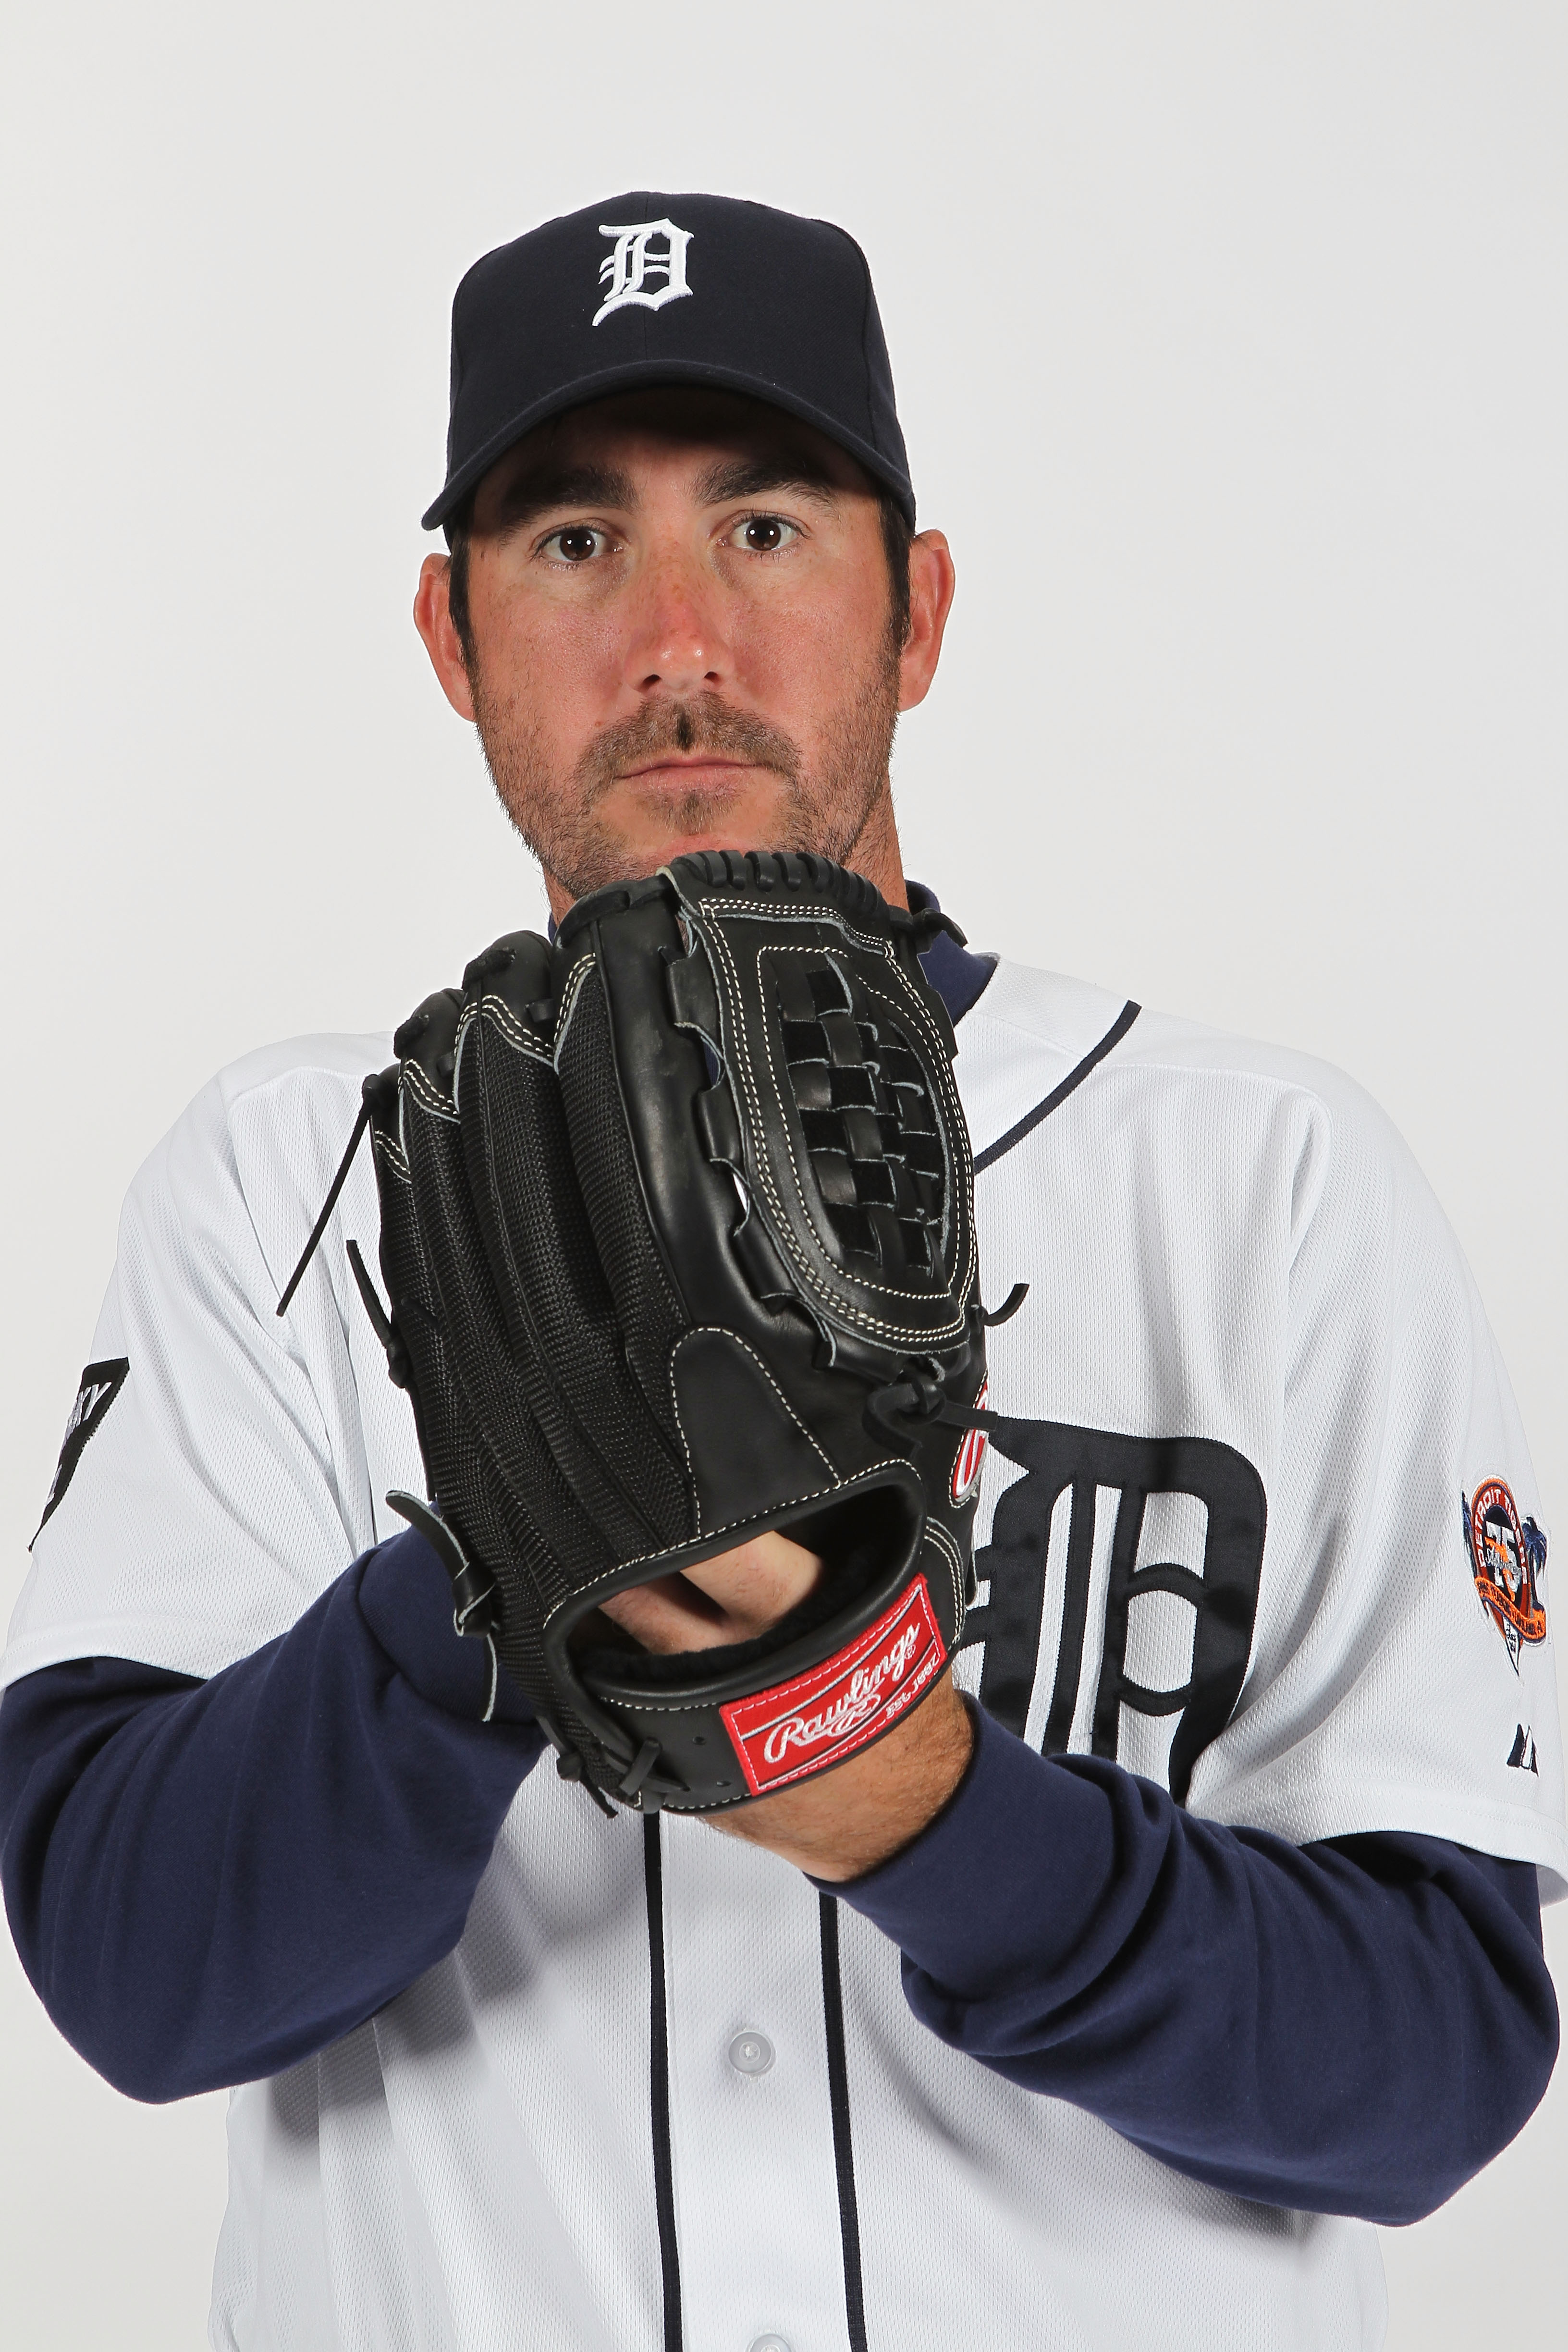 LAKELAND, FL - FEBRUARY 21:  Justin Verlander #35 of the Detroit Tigers poses for a portrait during Photo Day on February 21, 2011 at Joker Marchant Stadium in Lakeland, Florida.  (Photo by Nick Laham/Getty Images)